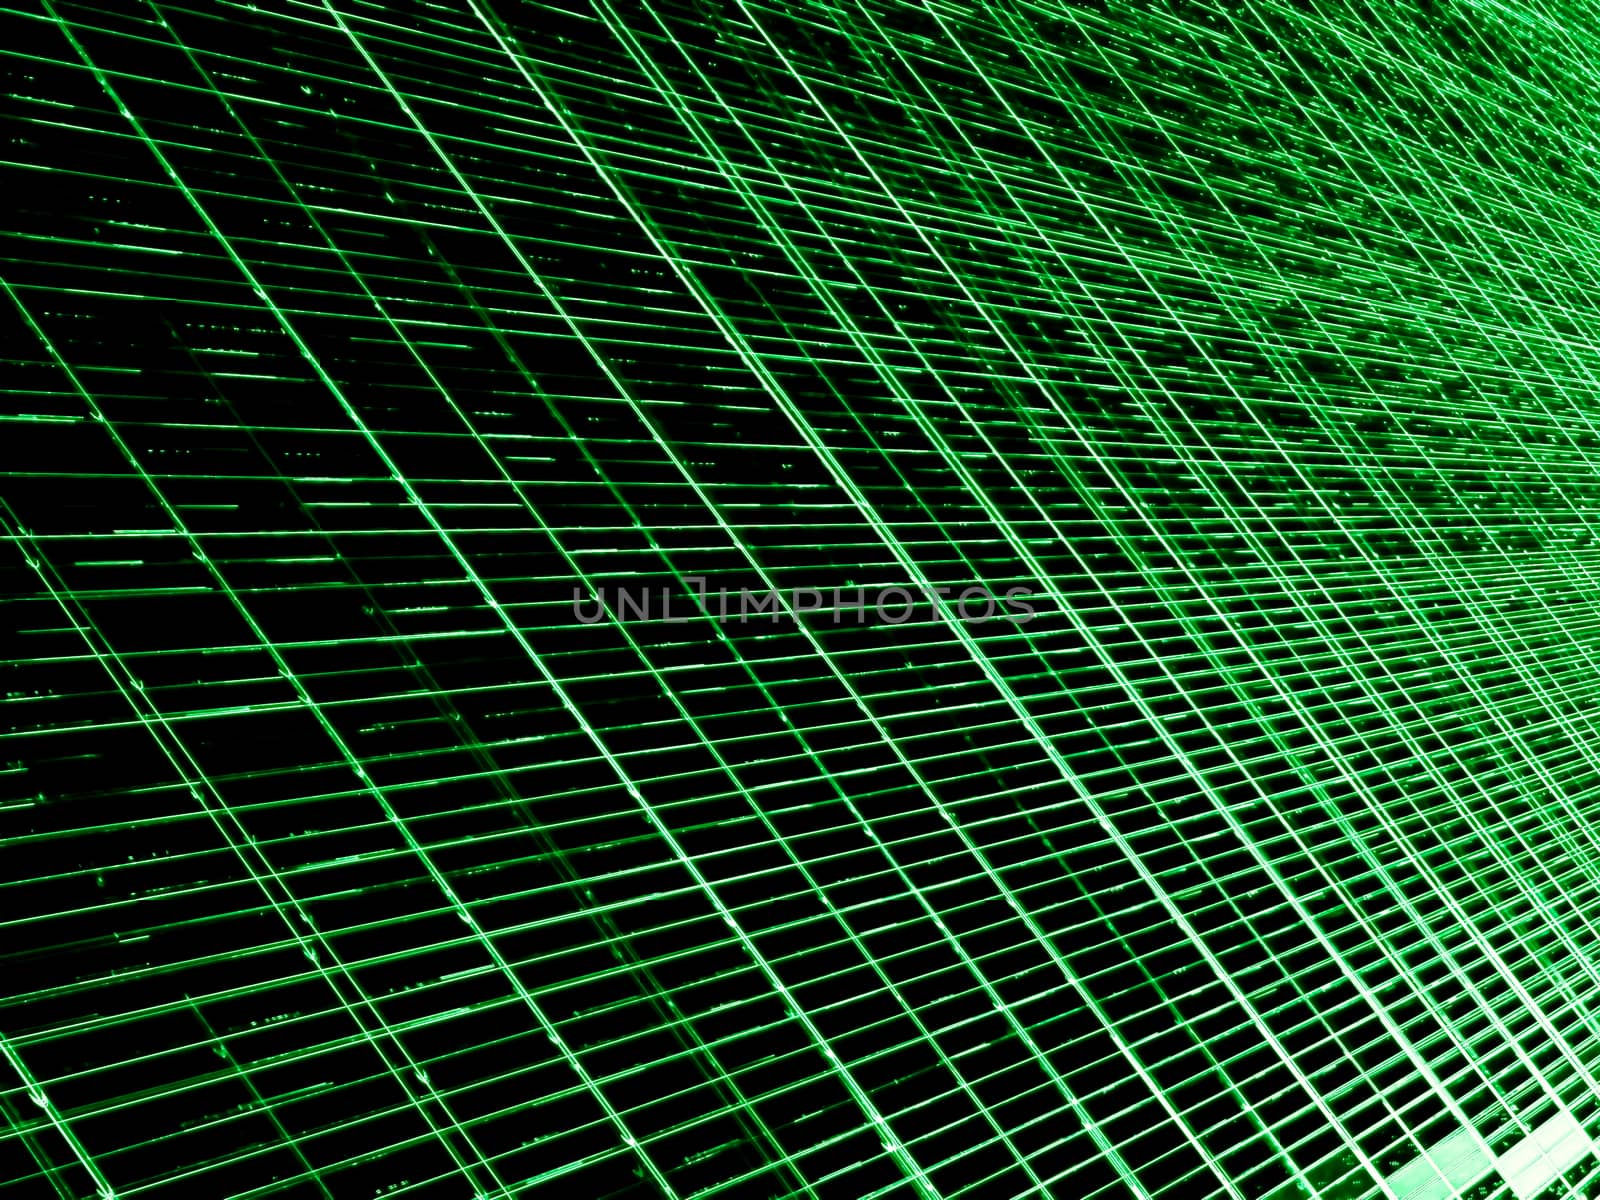 Technology style grid - abstract computer-generated image. Fractal geometry: crossing straight lines and cells. Digital art for backdrops, covers, web design.